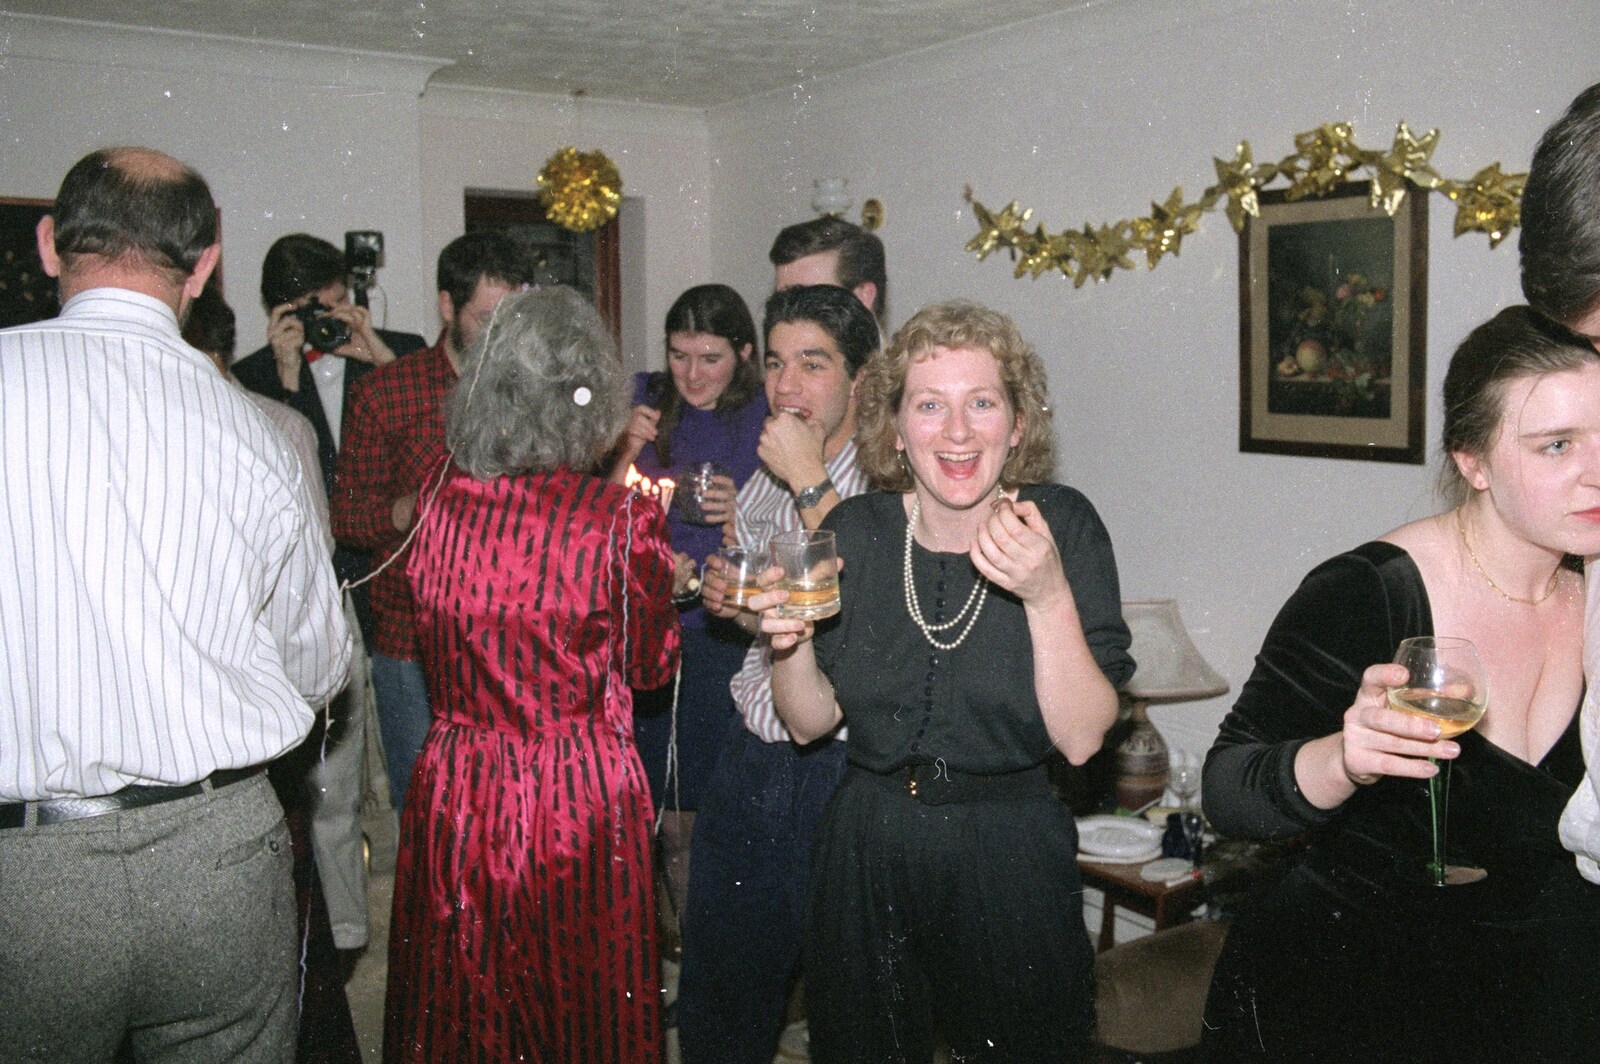 Chocolates all round from New Year's Eve at Phil's, Hordle, Hampshire - 31st December 1990